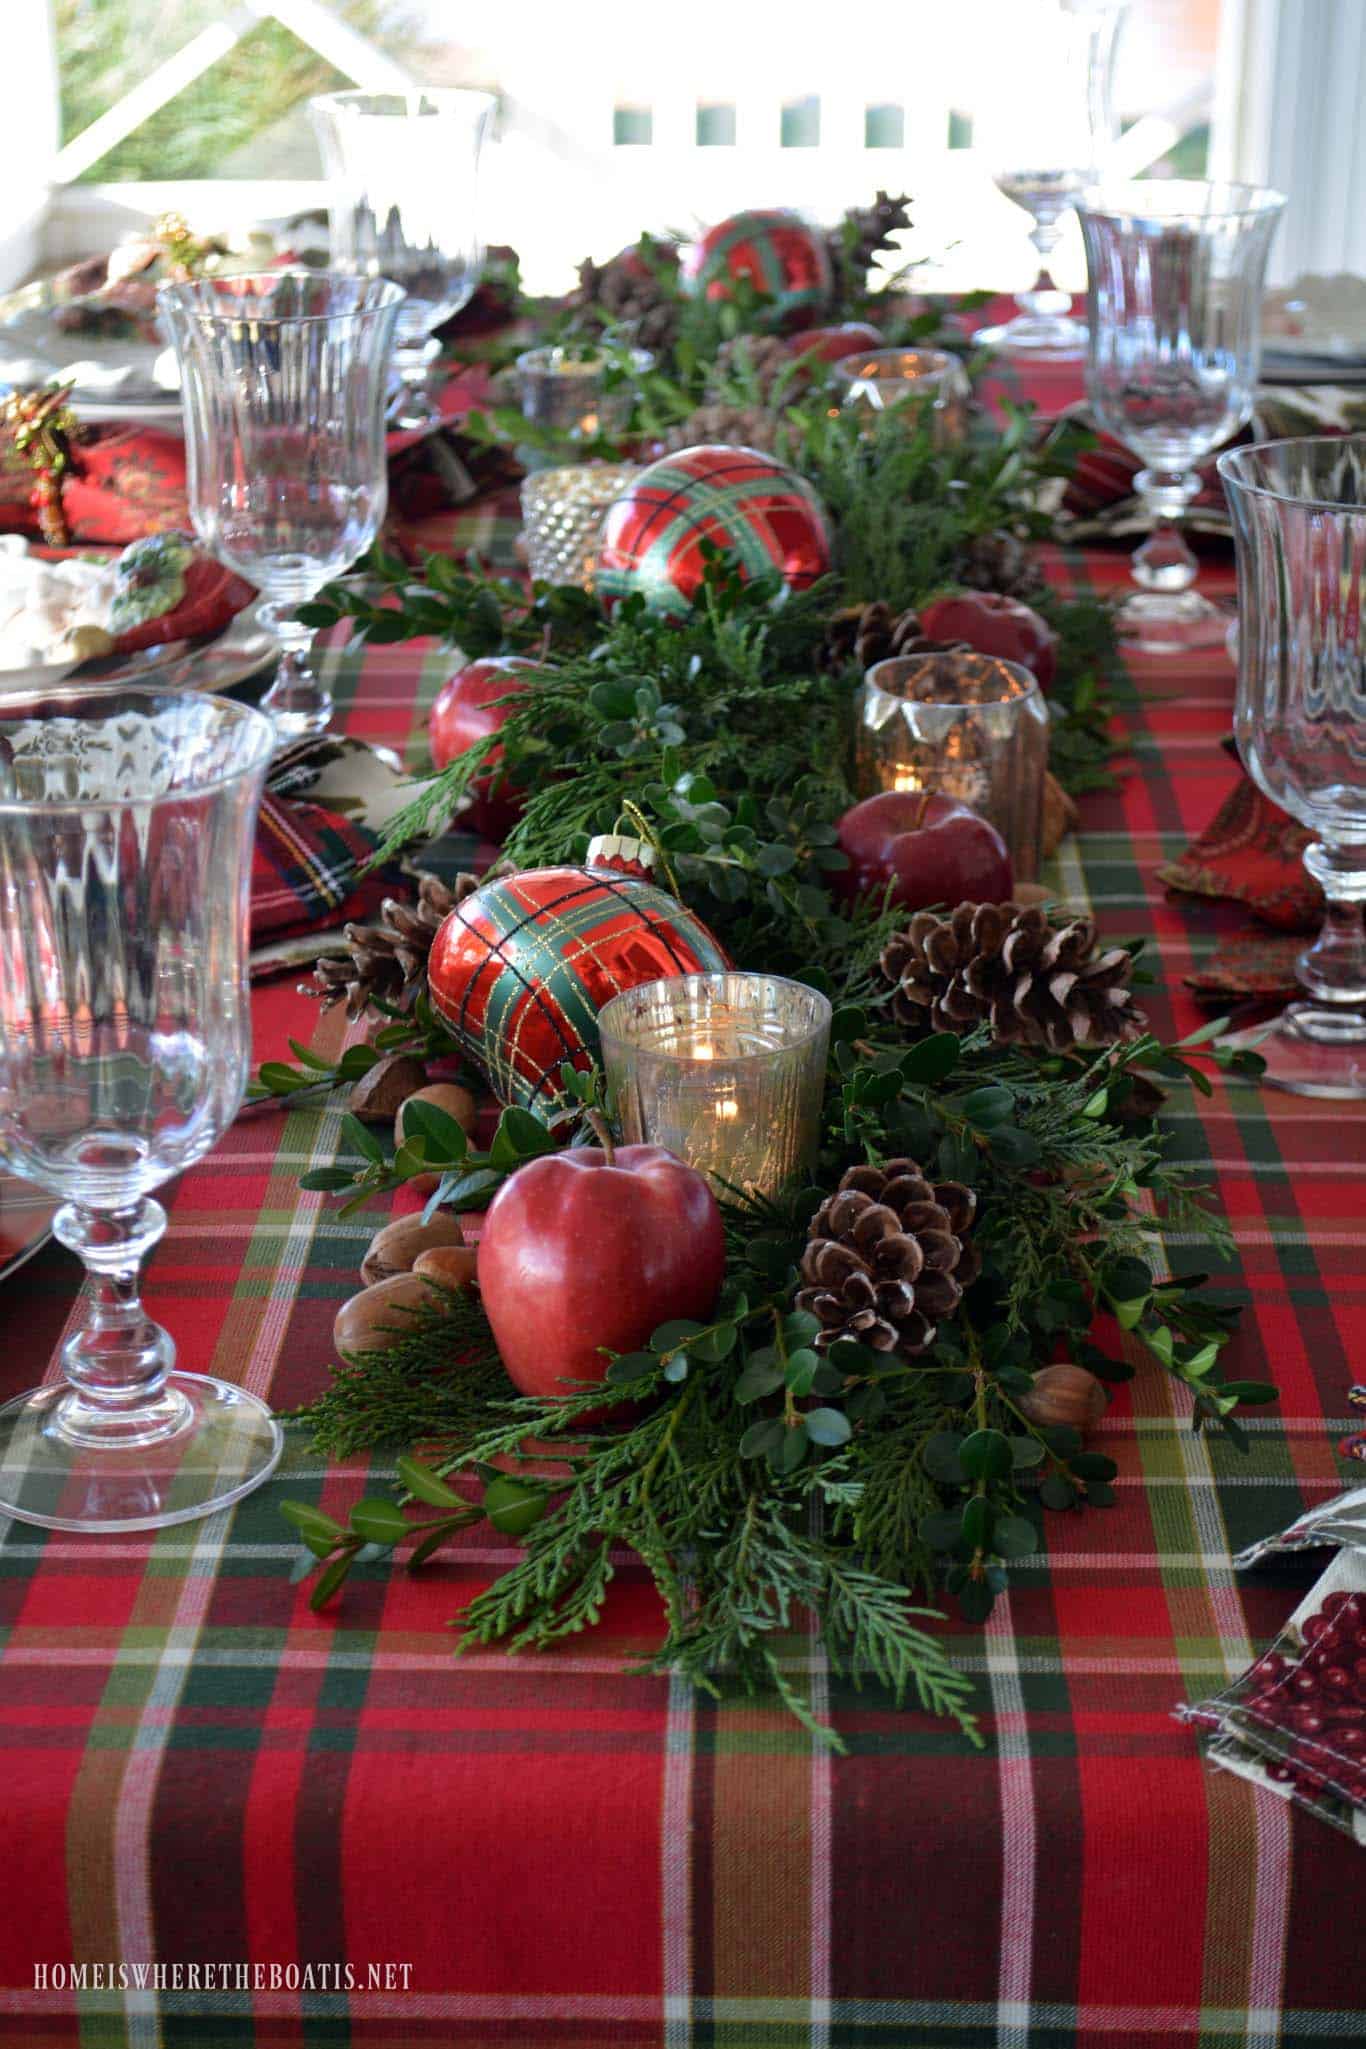 adjust Irrigation The trail 30+ Absolutely stunning ideas for Christmas table decorations